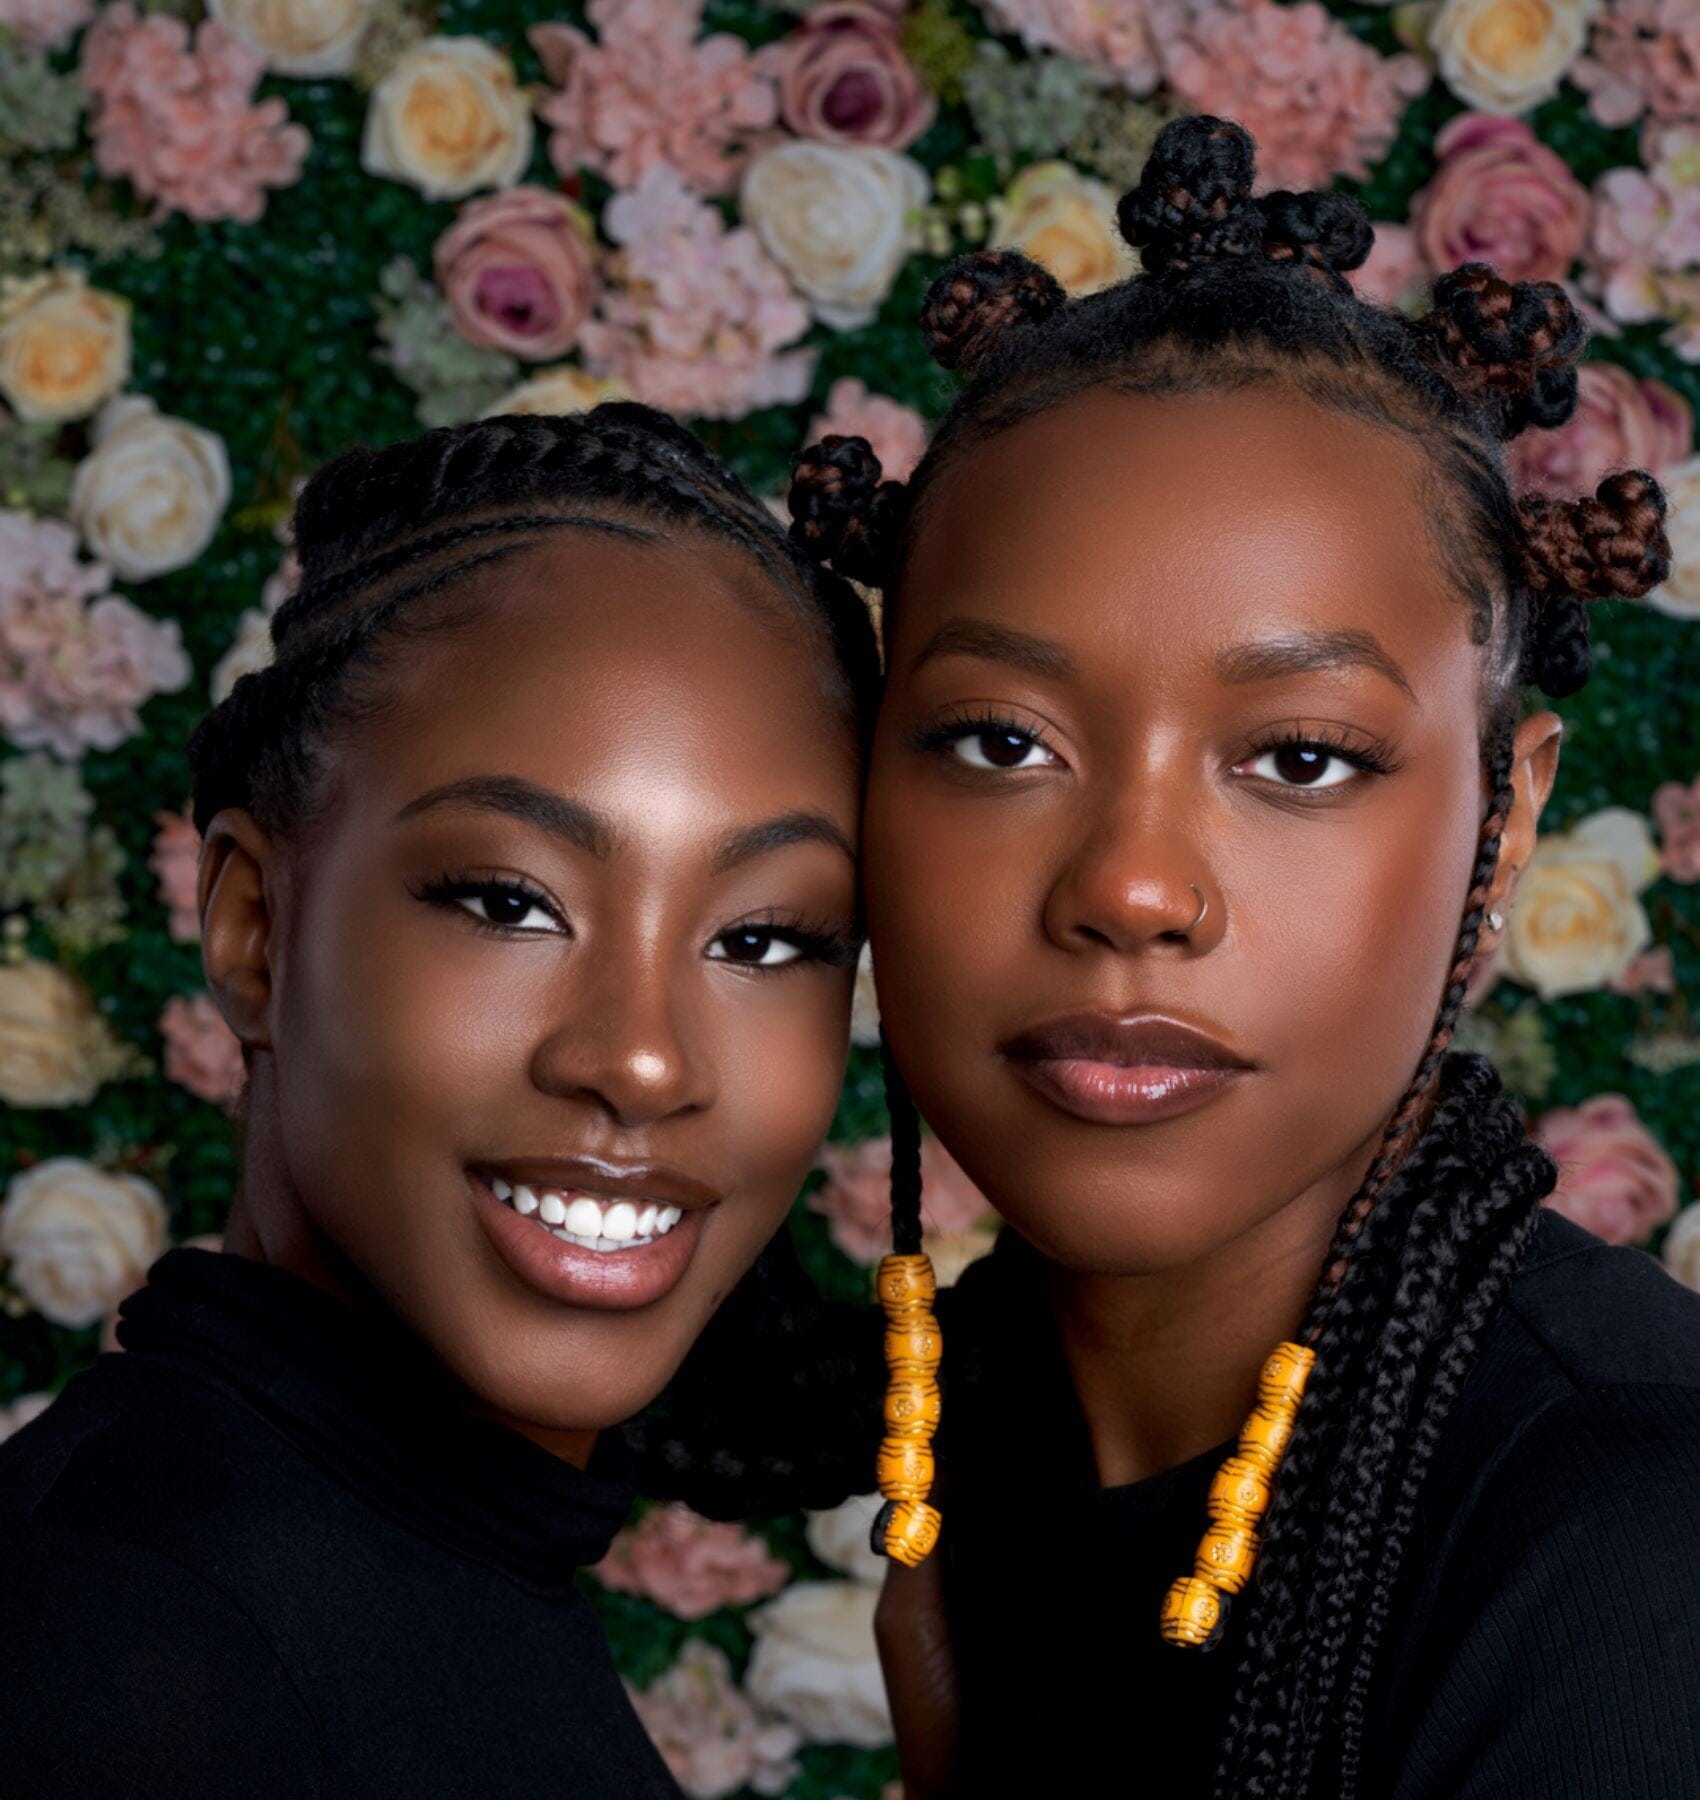 Close-up portrait of two black women with braided hairstyles, standing in front of a floral background.